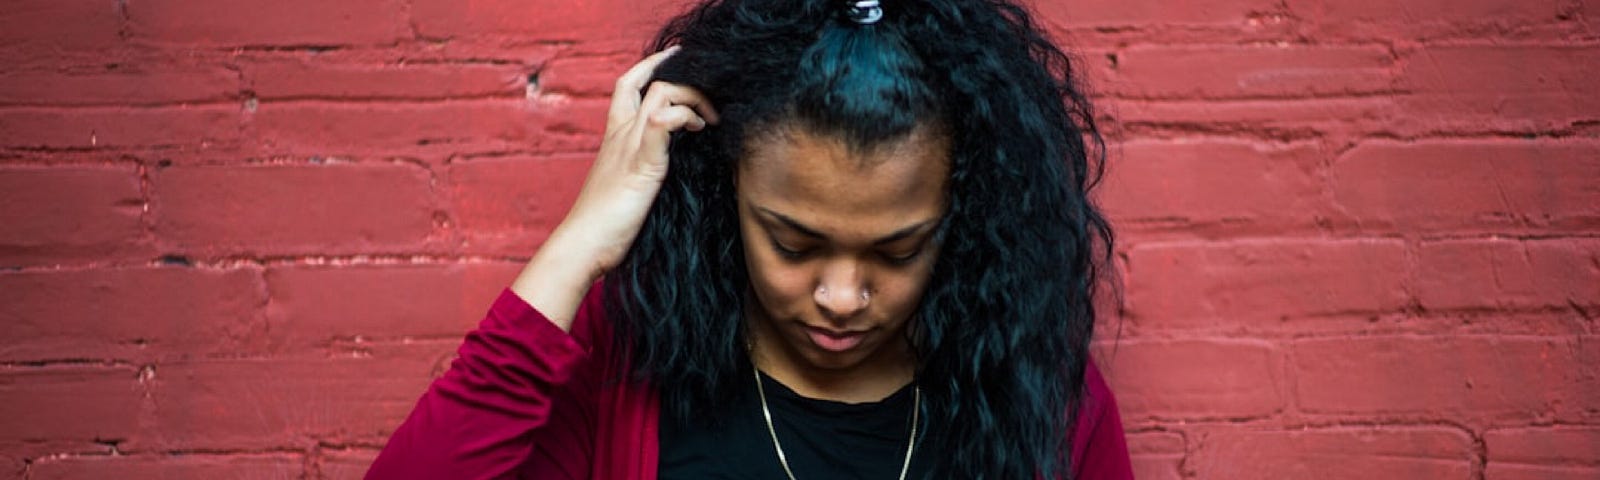 Andre Hunter took this photo of a woman looking down with her right hand in her hair.